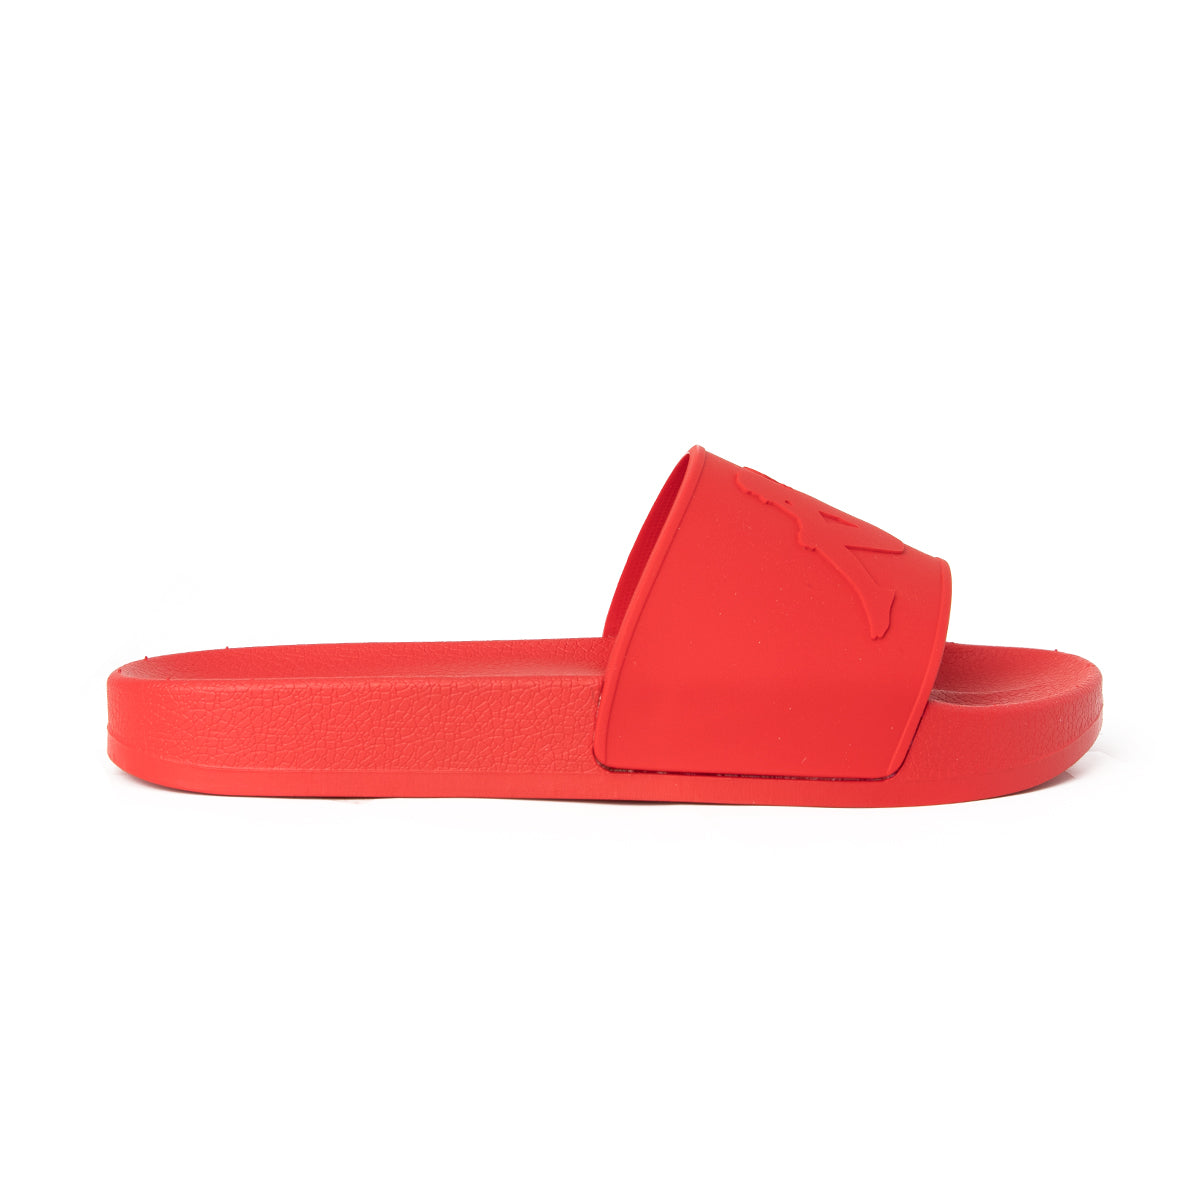 Kappa Authentic Caius 2 Slides - Red MD Coral